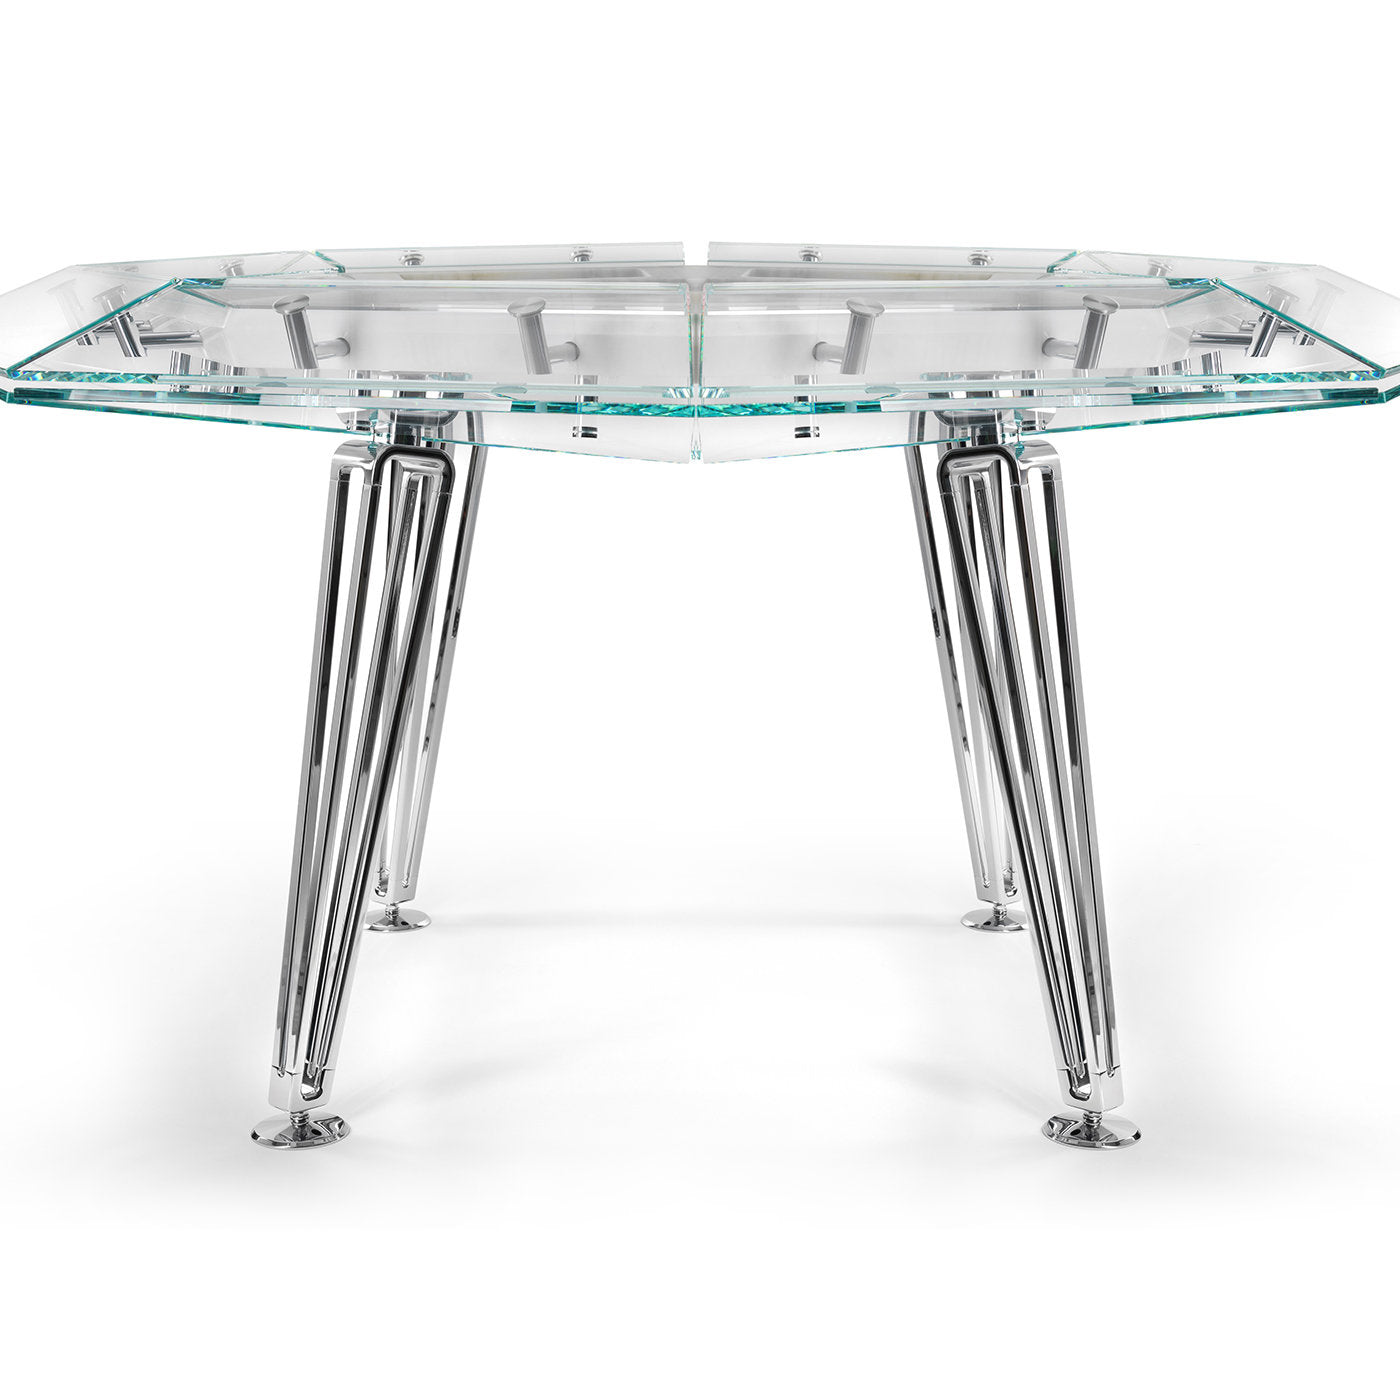 Unootto 8 Player Marble Edition White Poker Table - Alternative view 2